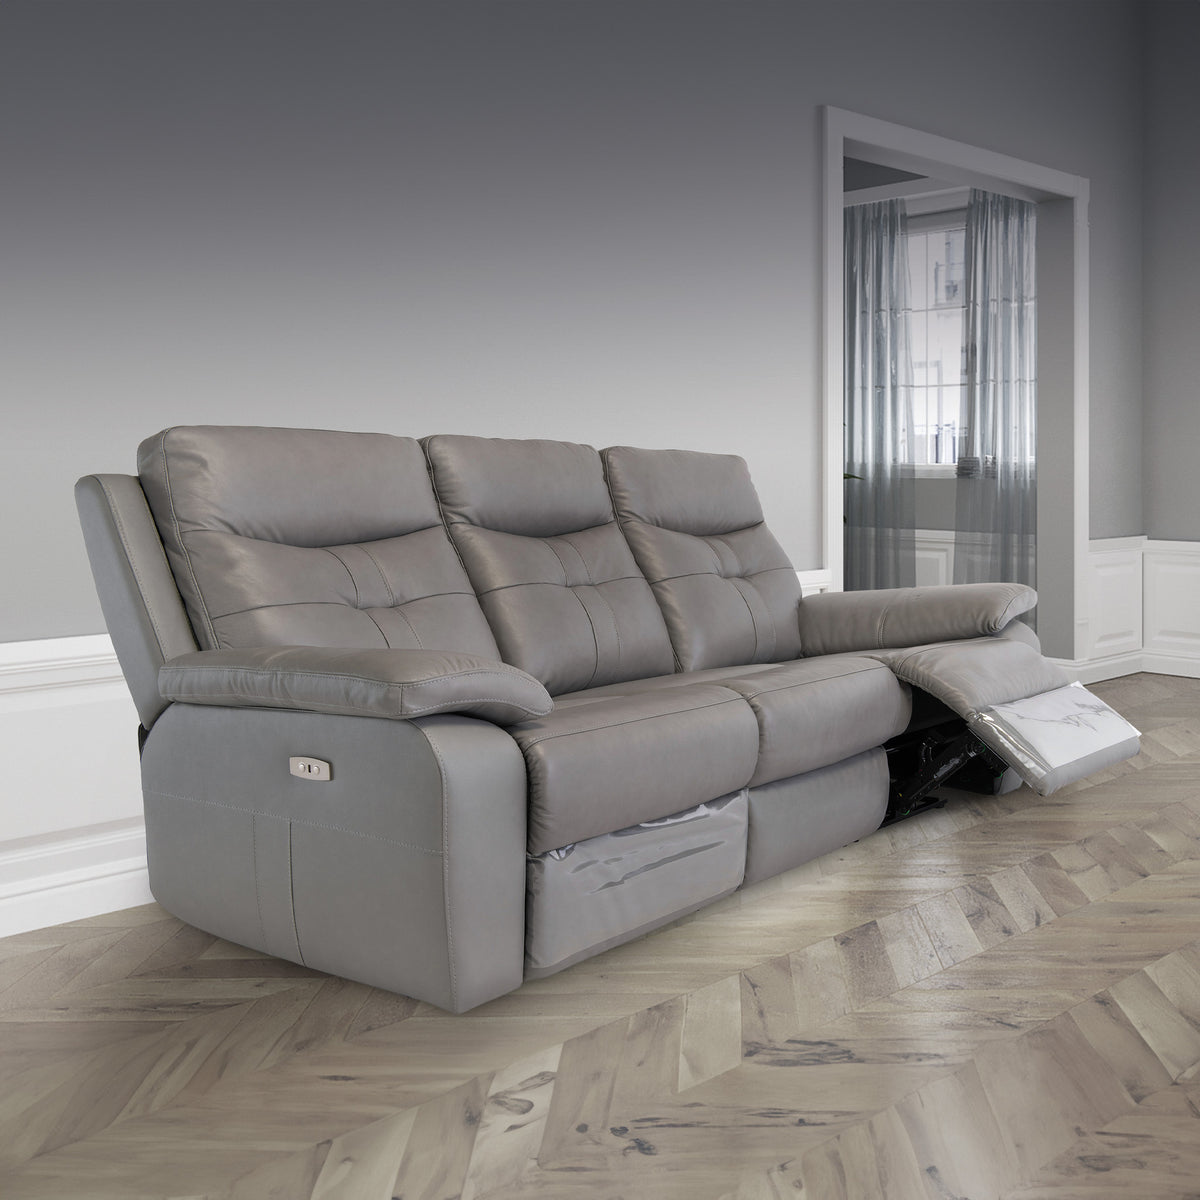 Talbot Grey Leather Electric Reclining 3 Seater Sofa for living room